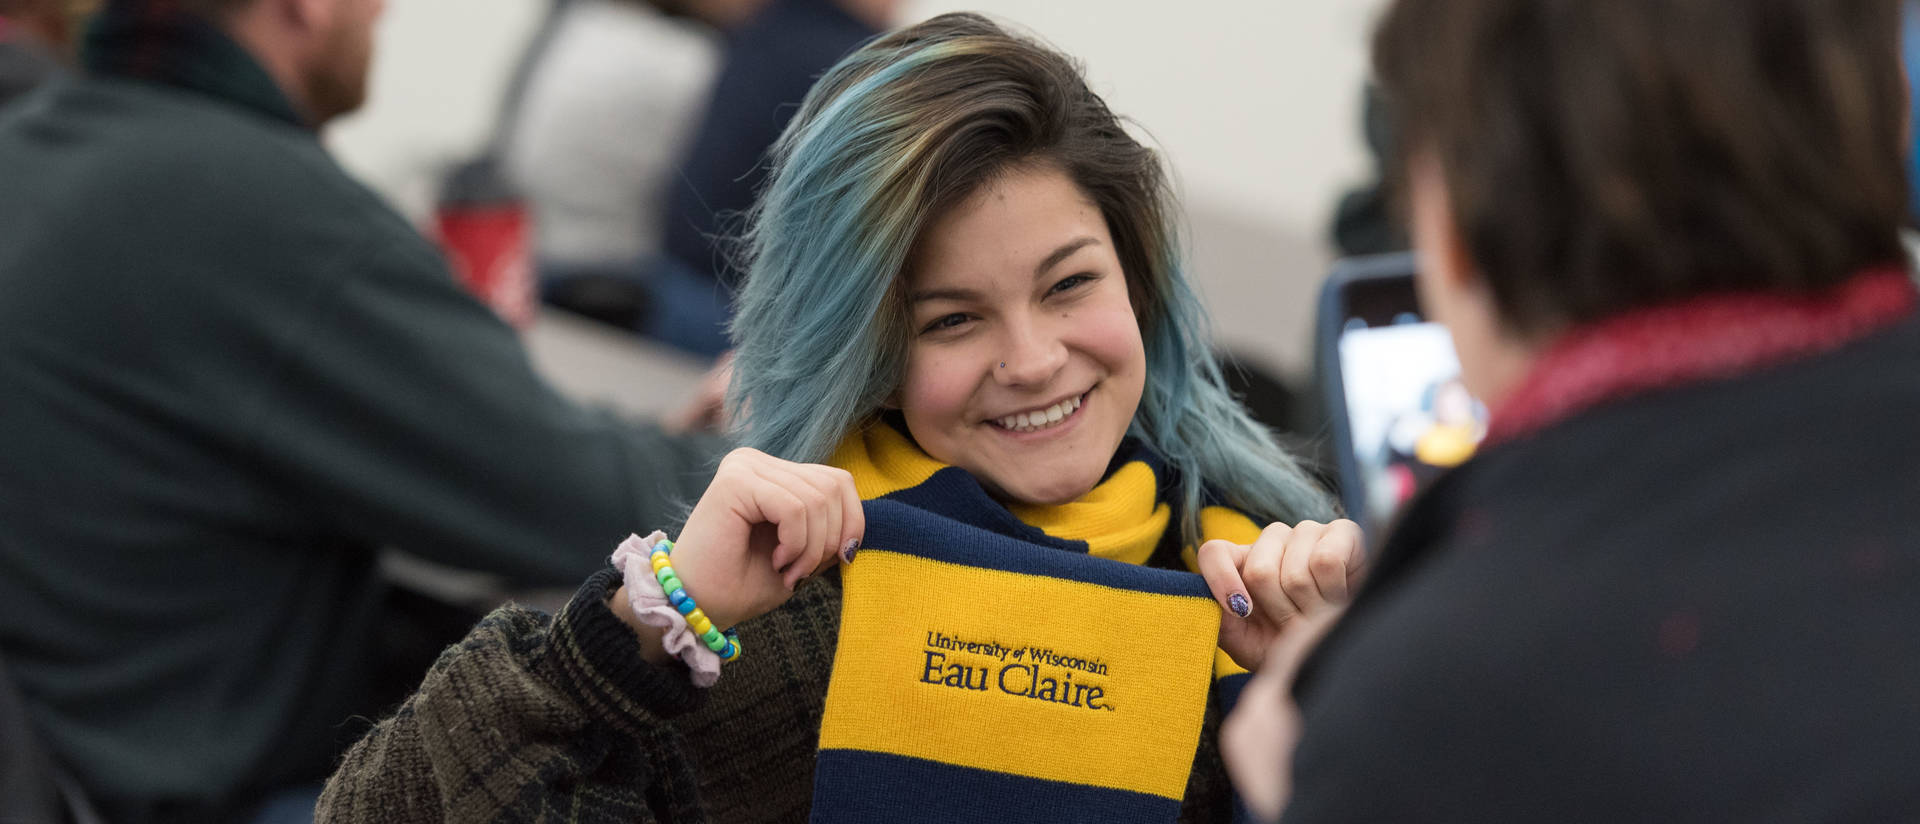 UW-Eau Claire future Blugold student visits campus for Admitted Student Day.